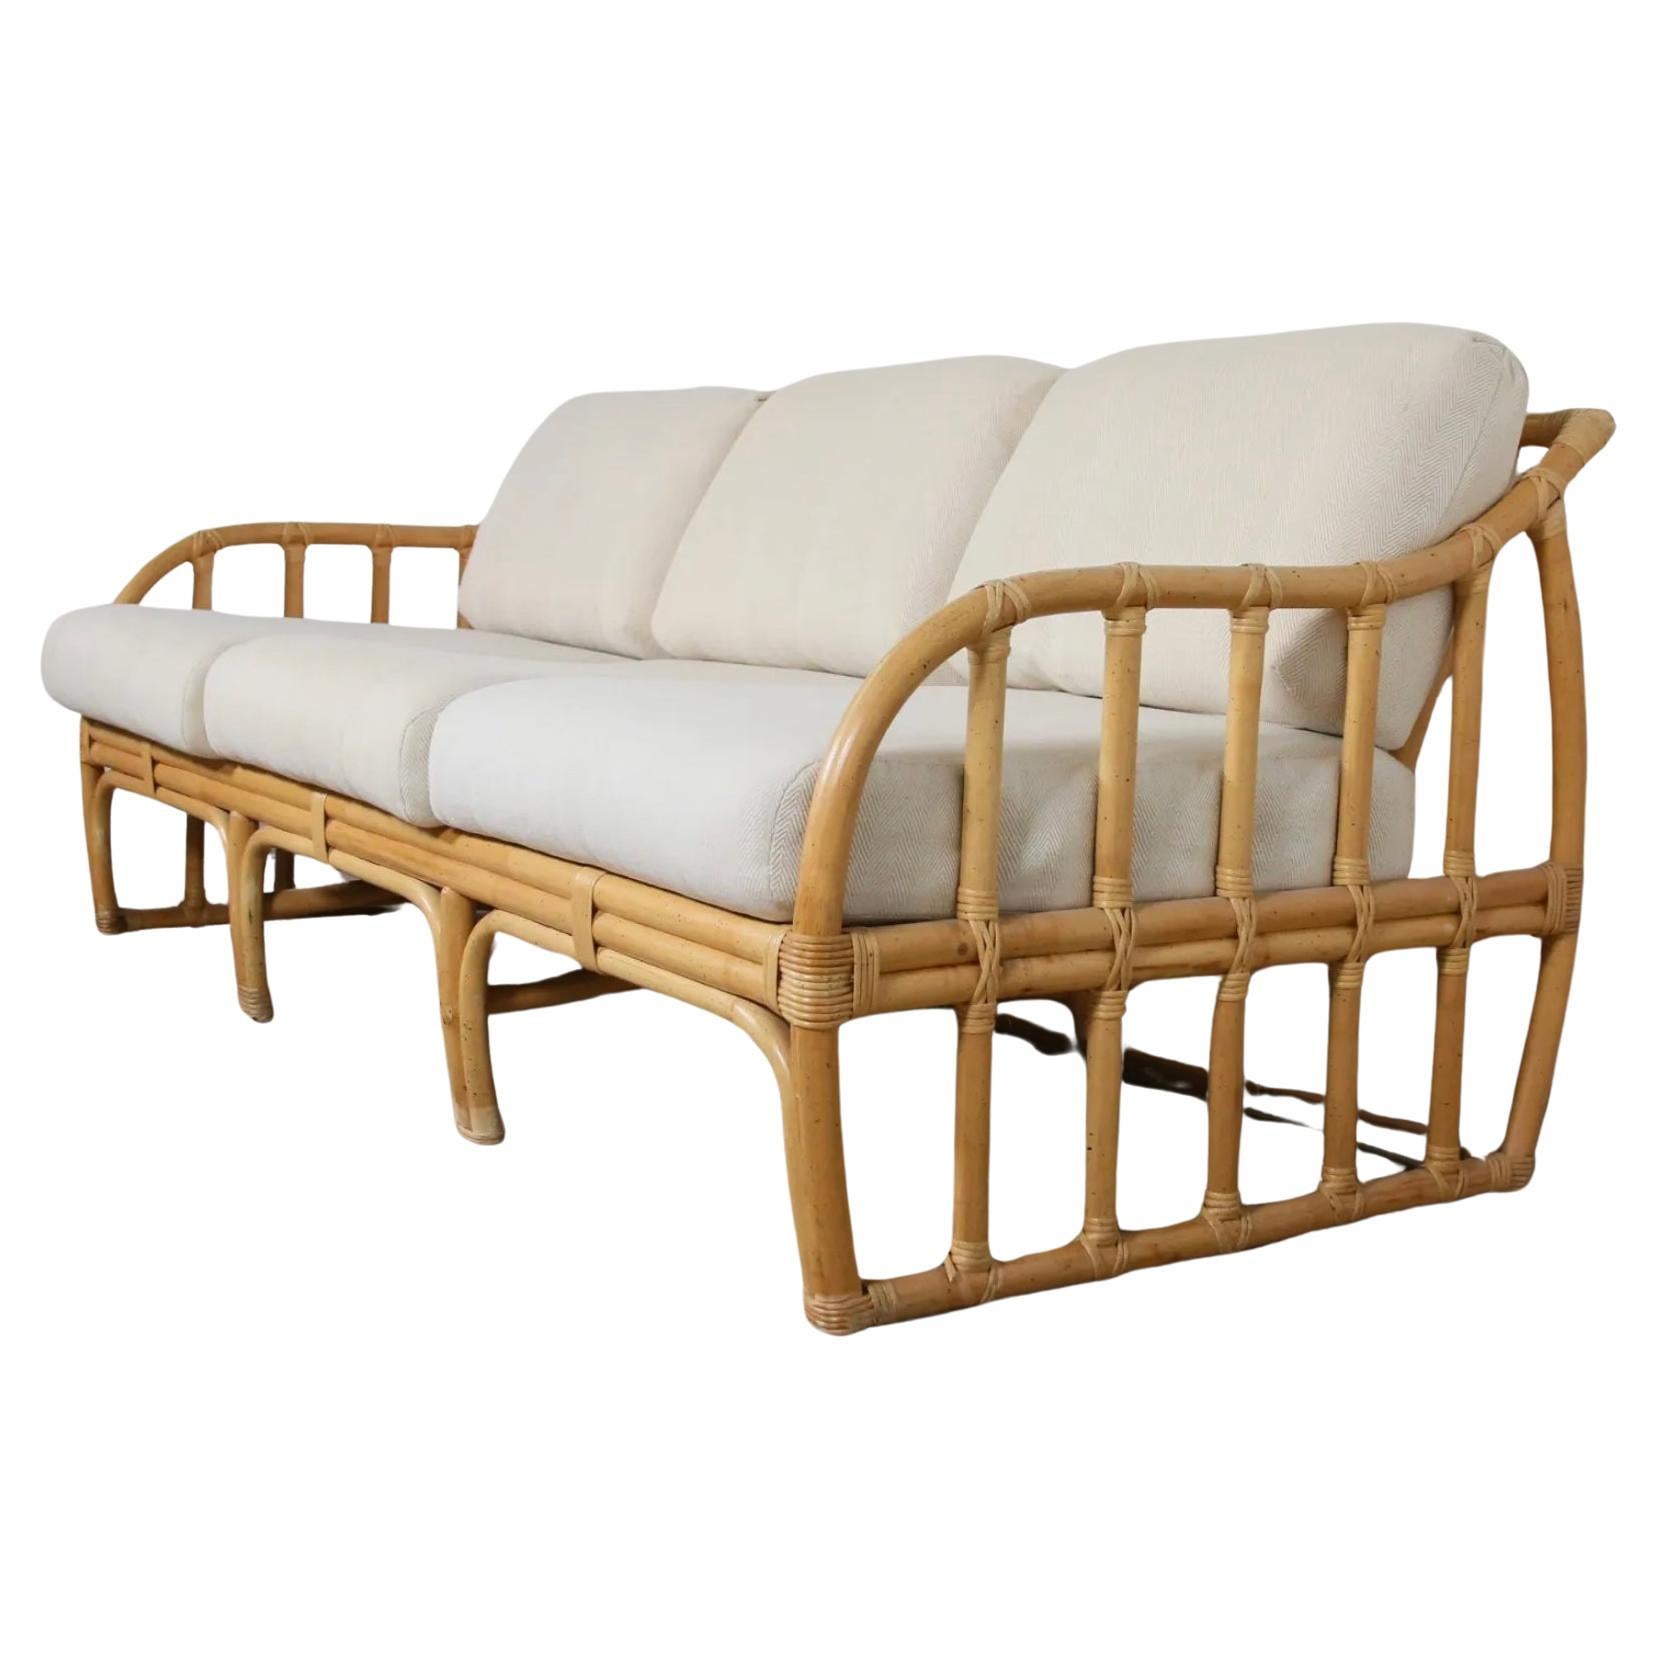 Mid Century Modern bamboo and rattan sofa by Ficks Reed. Cincinnati, OH, 1970s. Bentwood bamboo and rattan frame in sandstone finish with burlap supporting white seat and back cushions. Cushions are in Vintage condition can use as is or reupholster